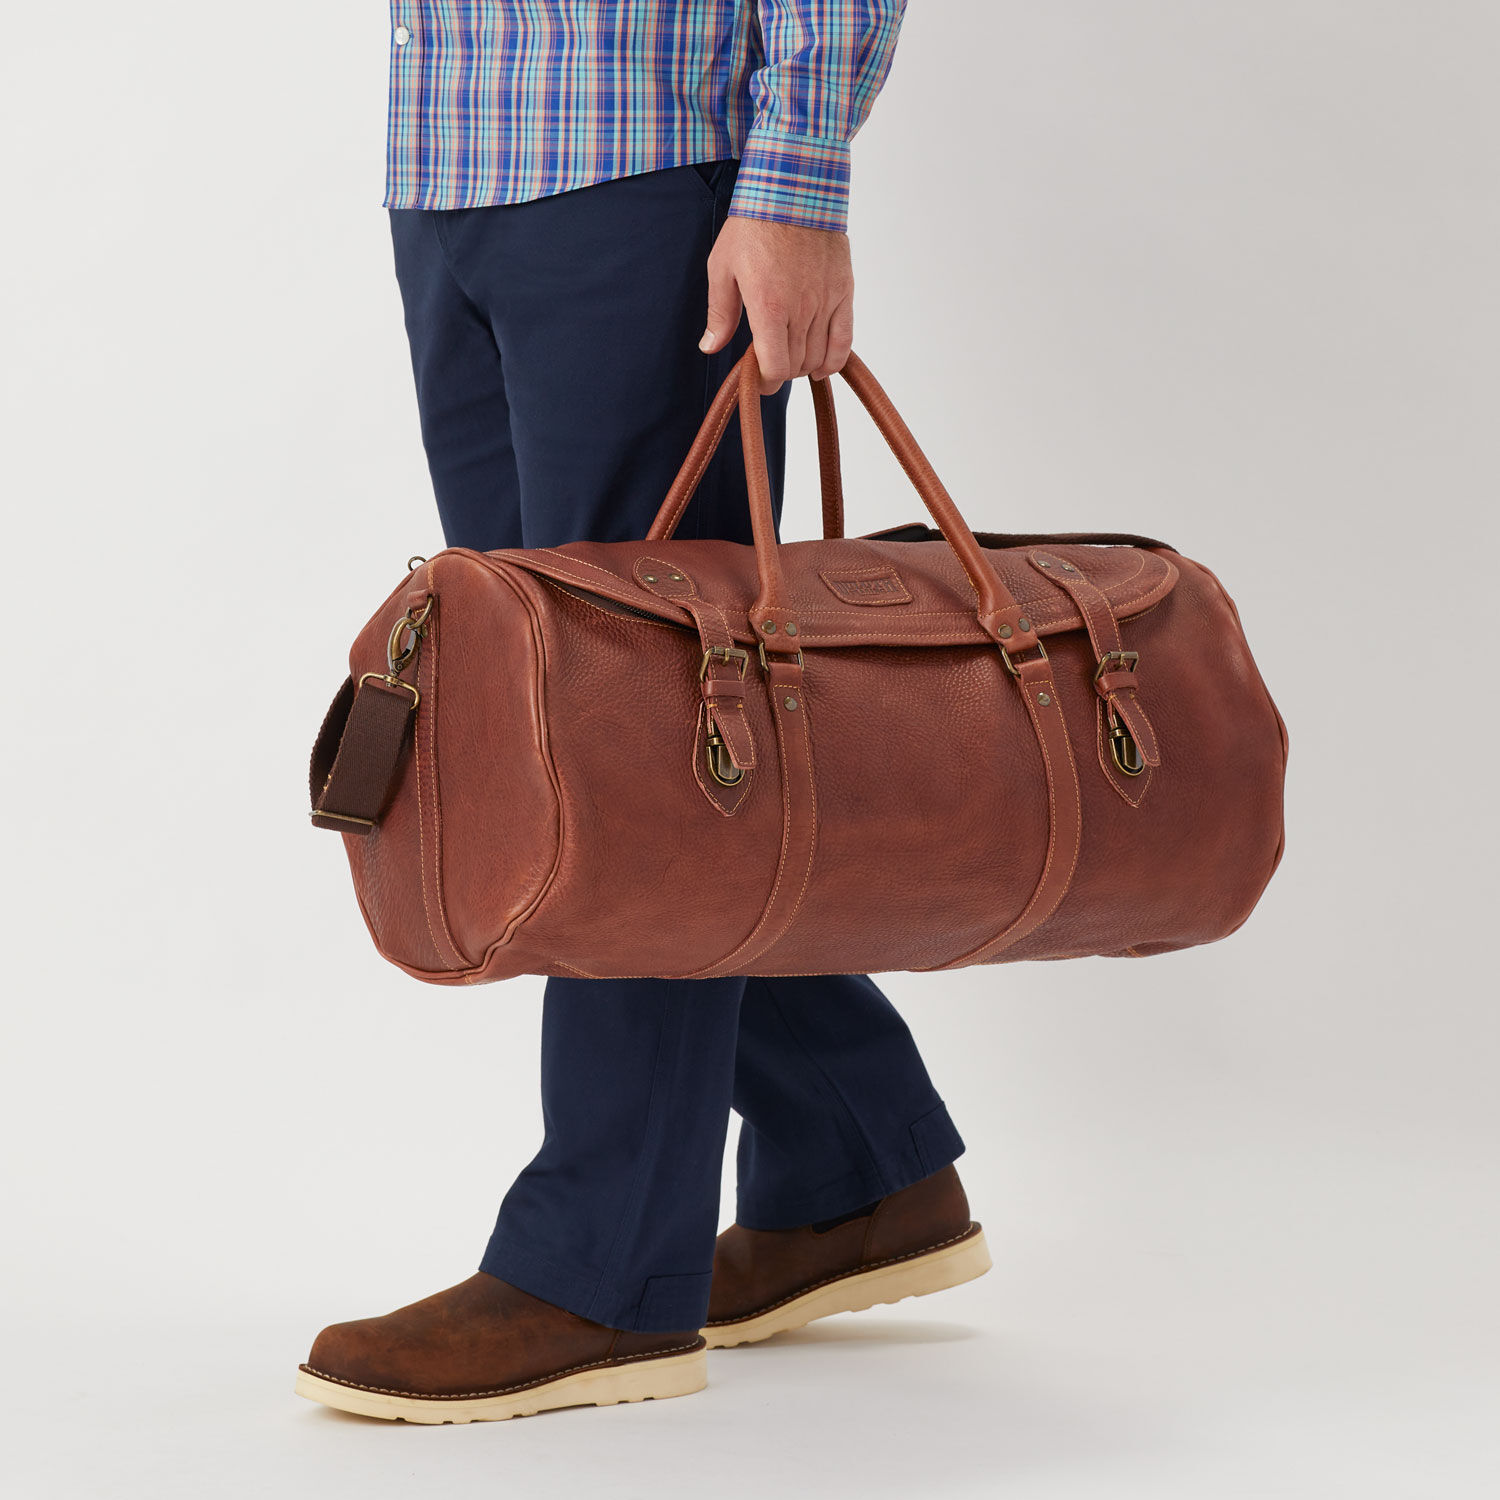 Goldline (Expandable) Leather Travel Duffle Bag/Leather Gym Bag/Leather  Duffle Bag for Men and Women with Shoe Compartment (Weather Resistant, 50L,  Tan) Duffel Without Wheels Tan - Price in India | Flipkart.com